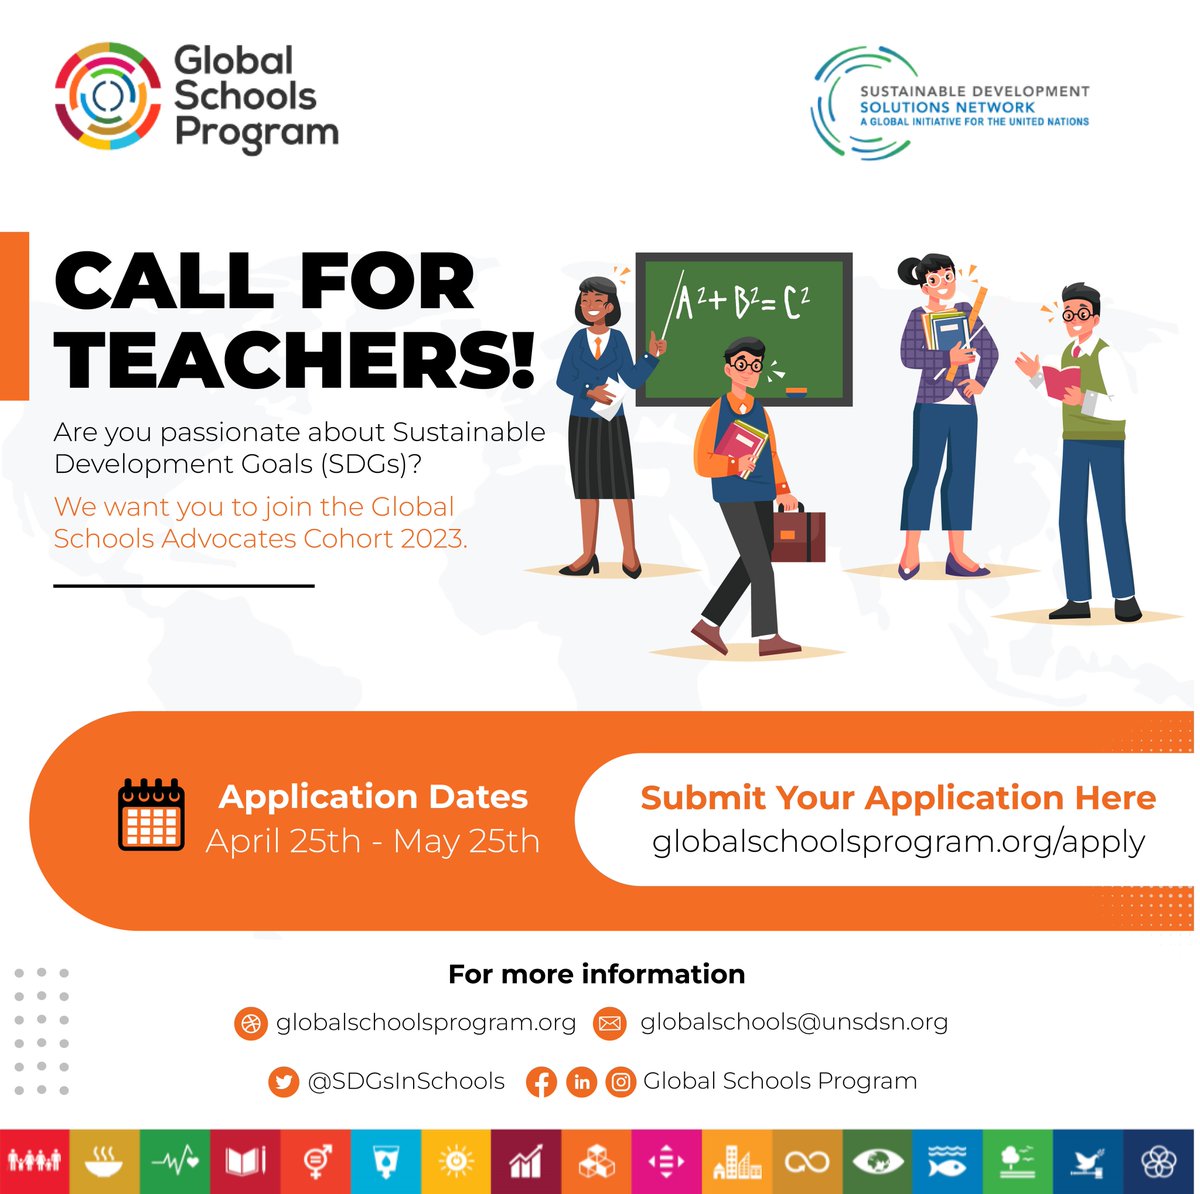 📢ATTENTION TEACHERS!

Just ONE week left! Have you applied to be part of the #GlobalSchoolsAdvocates 2023 cohort? 

Apply now ➡️ bit.ly/3L9wO6r 

Share this opportunity with teachers you know who are passionate about education for sustainable development. 

#ESD #SDG4